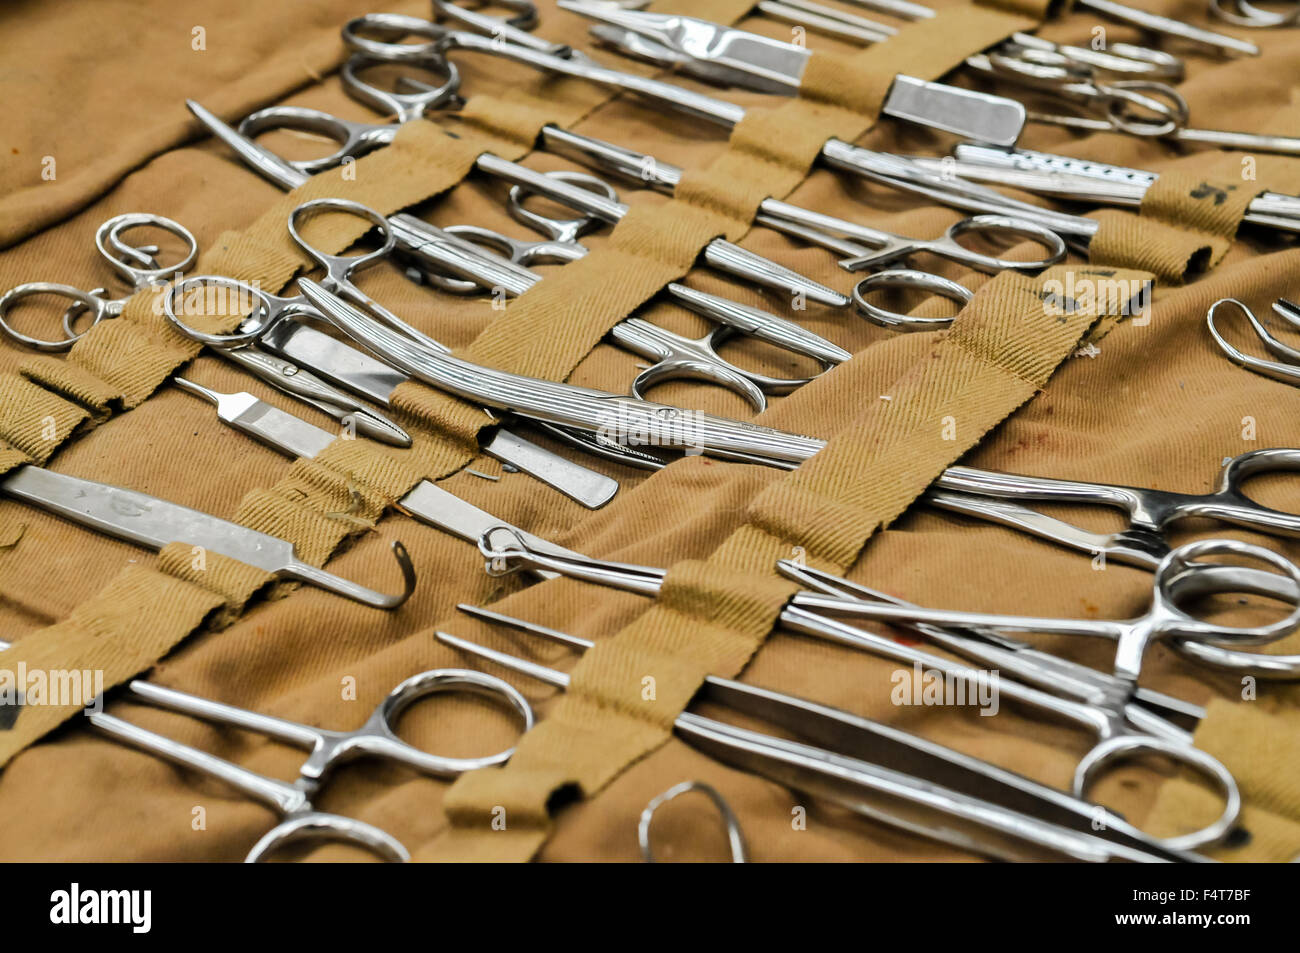 Large selection of stainless steel surgical equipment, including Magill and artery forceps, tweezers, retractors in canvas roll Stock Photo